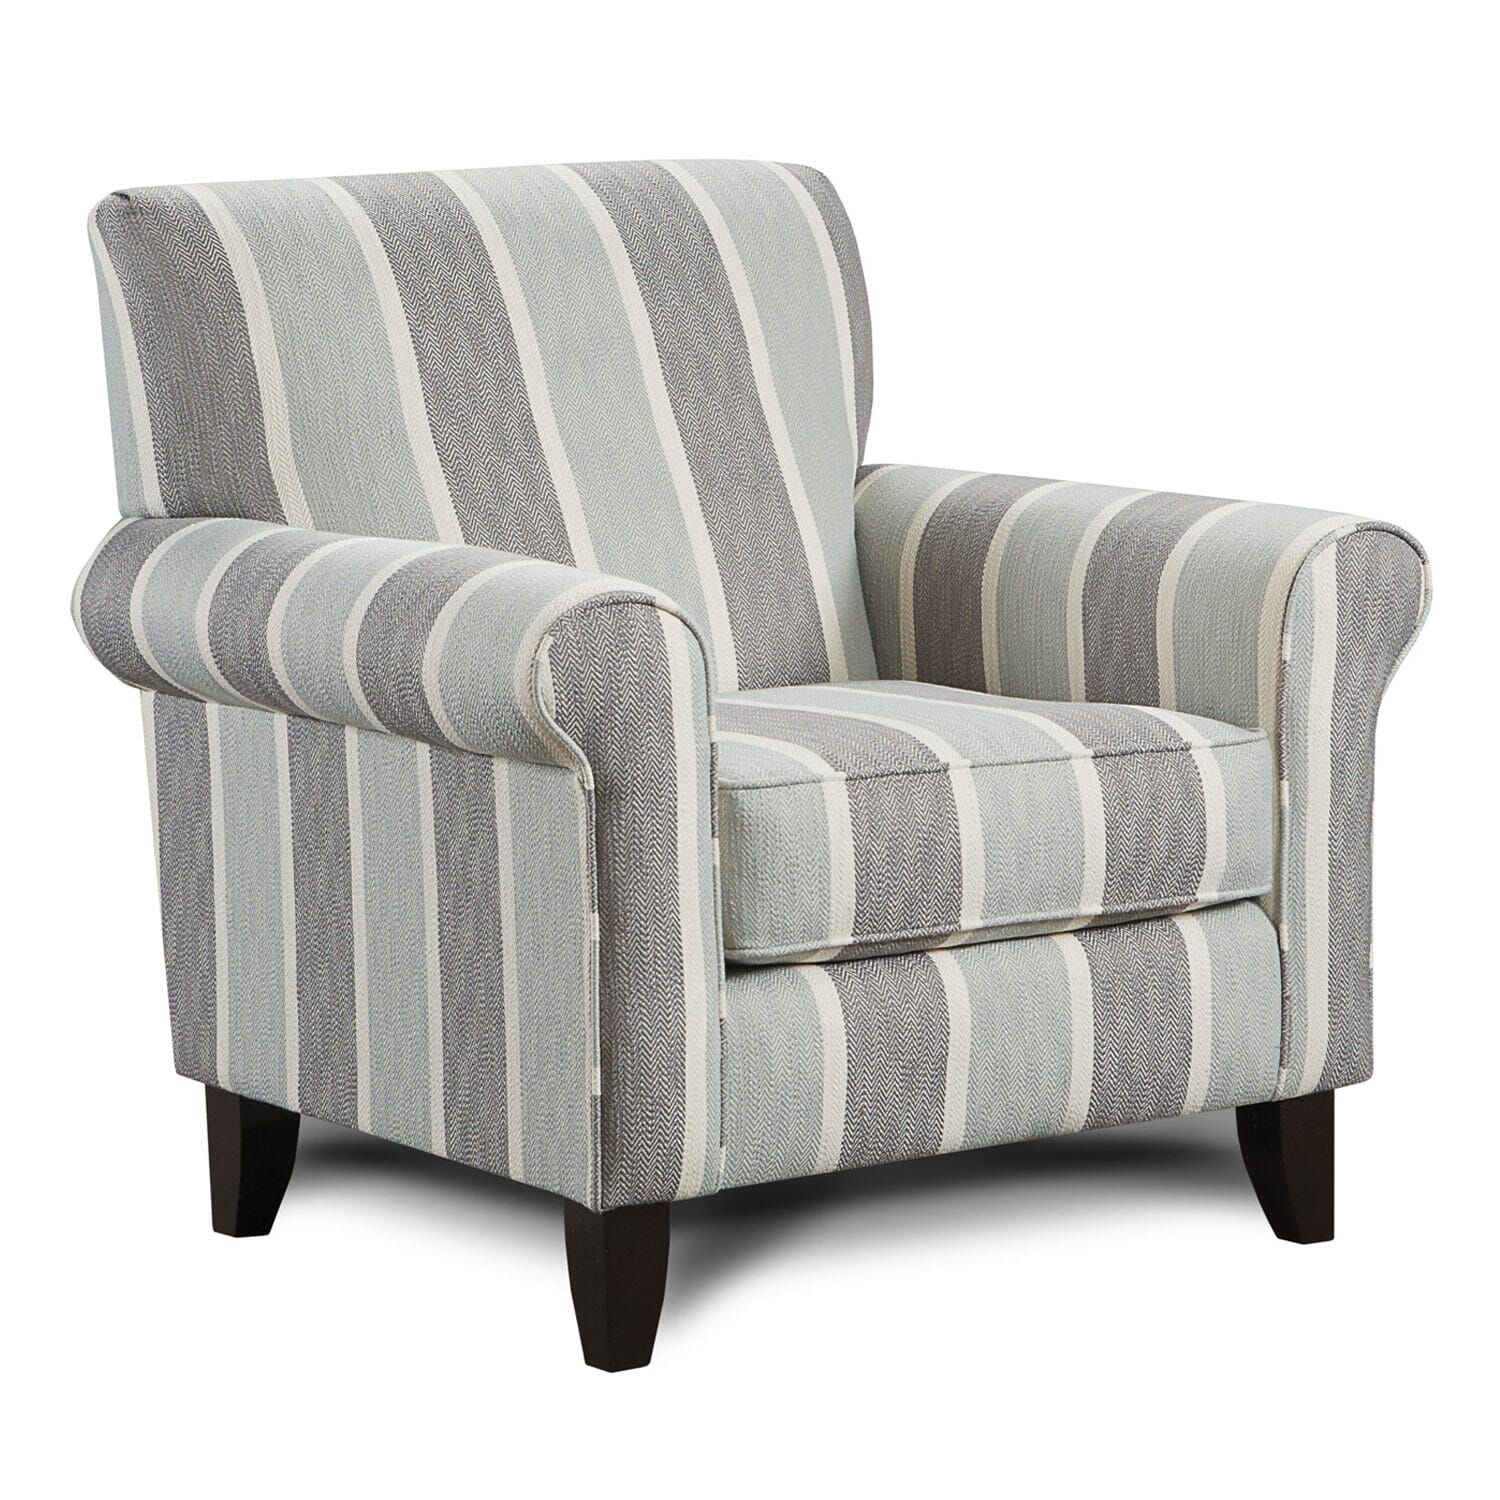 Ainsley Stripe Accent Chair | Chairs | Wg&R Furniture Intended For Striped Sofas And Chairs (View 9 of 15)